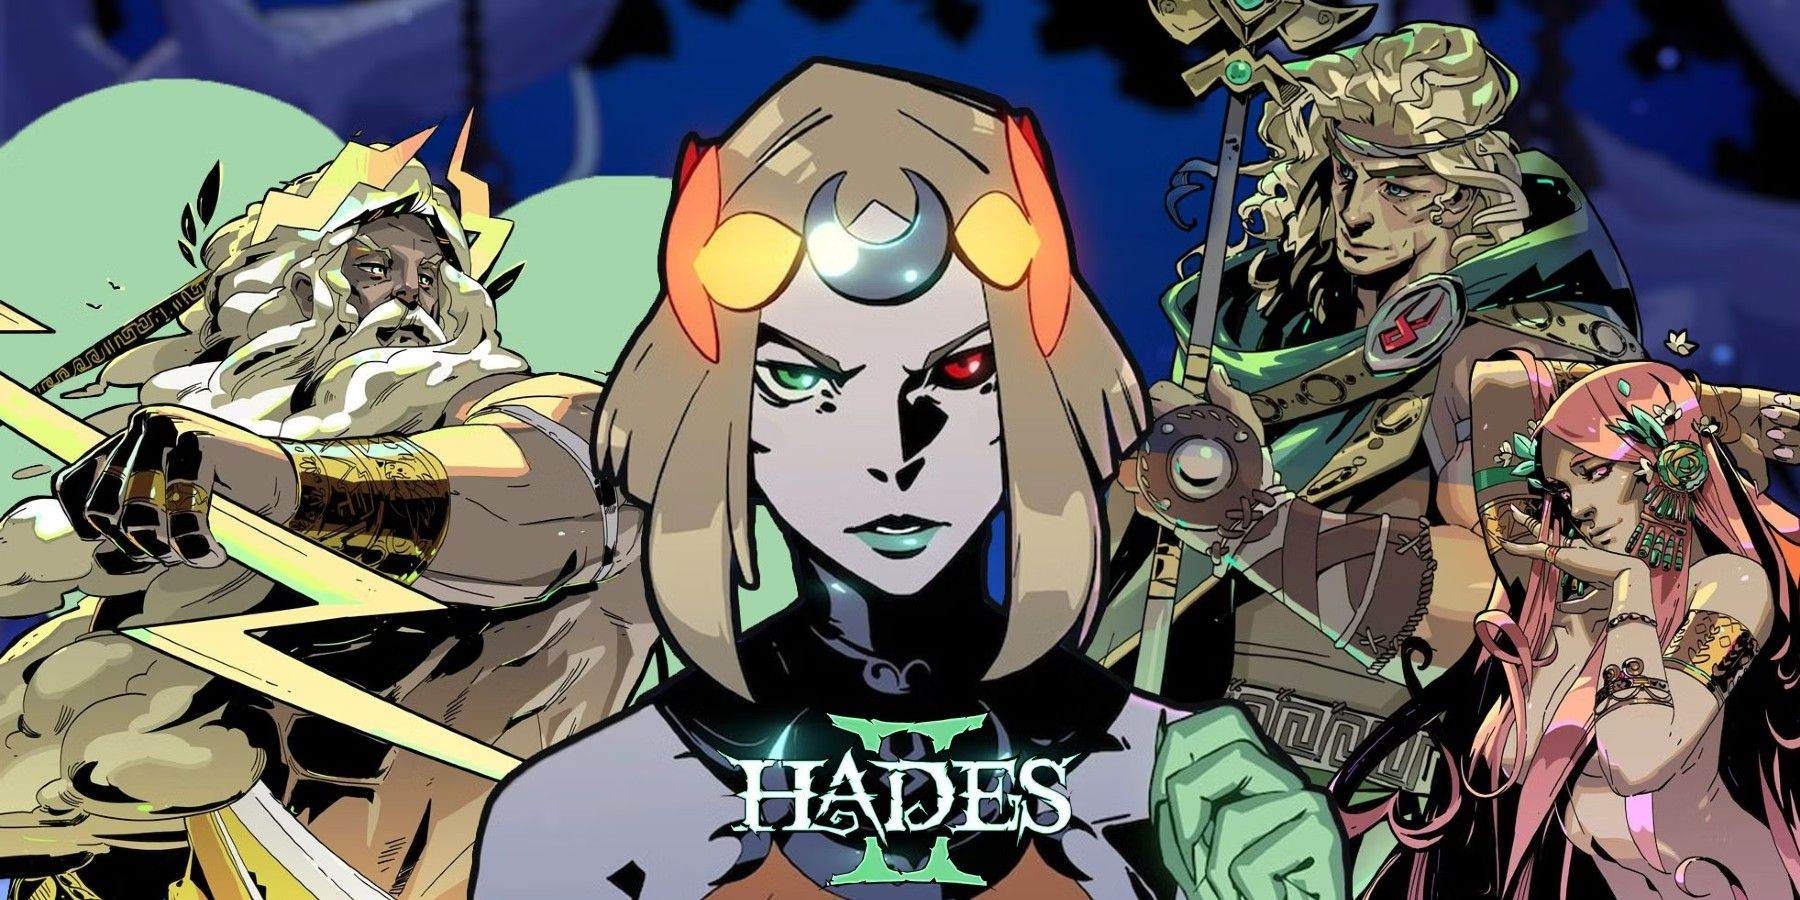 All Hades 2 characters revealed so far